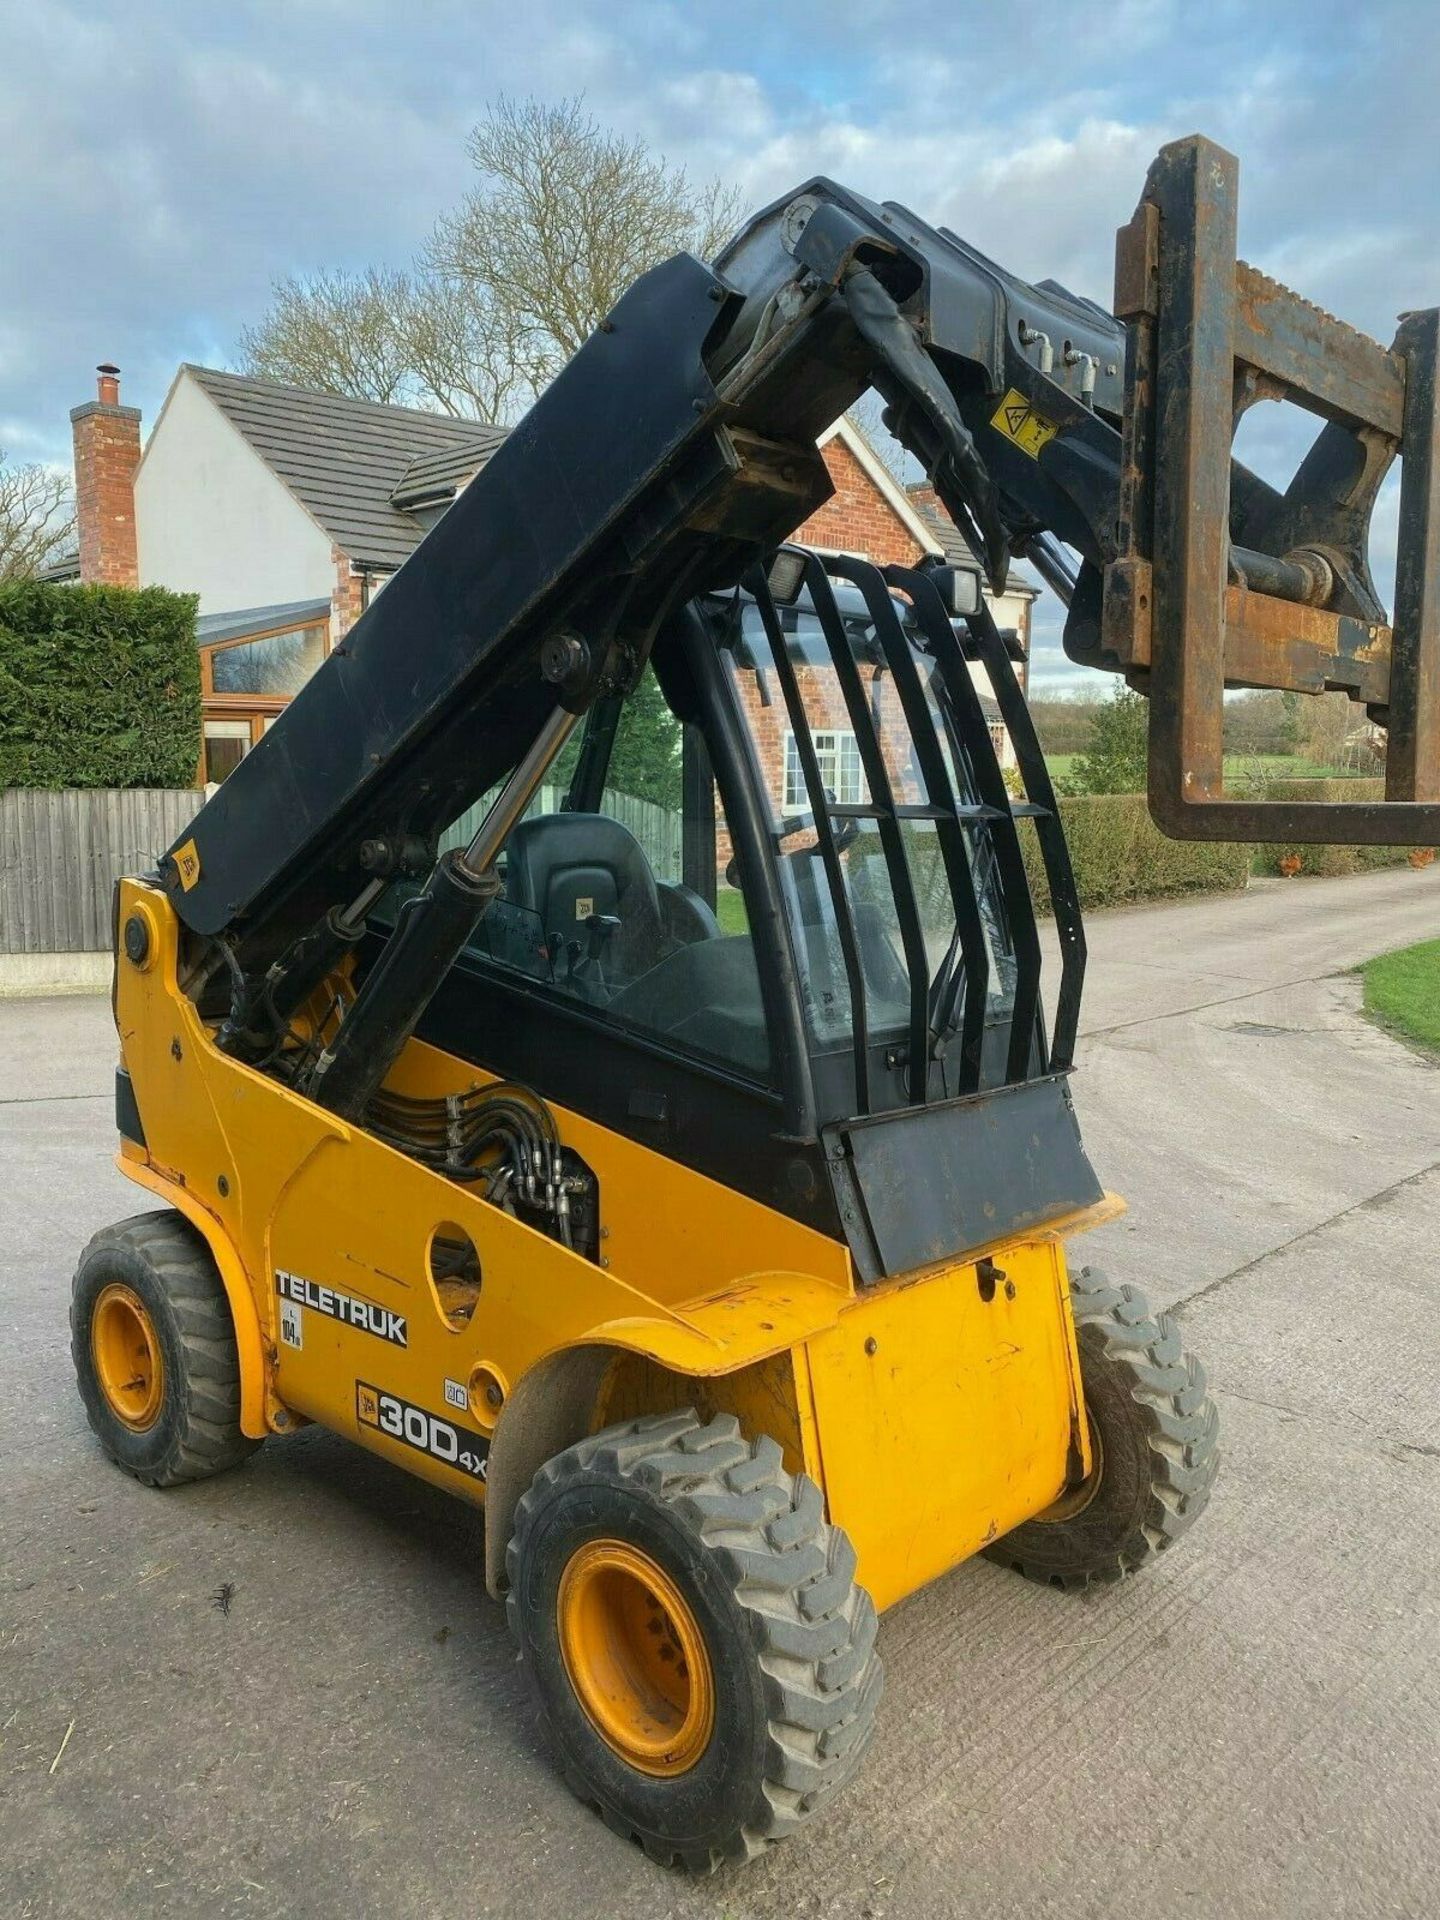 JCB TELETRUK 30D , 4x4, YEAR 2013, ONLY 1359 HOURS FROM NEW *PLUS VAT* - Image 2 of 7